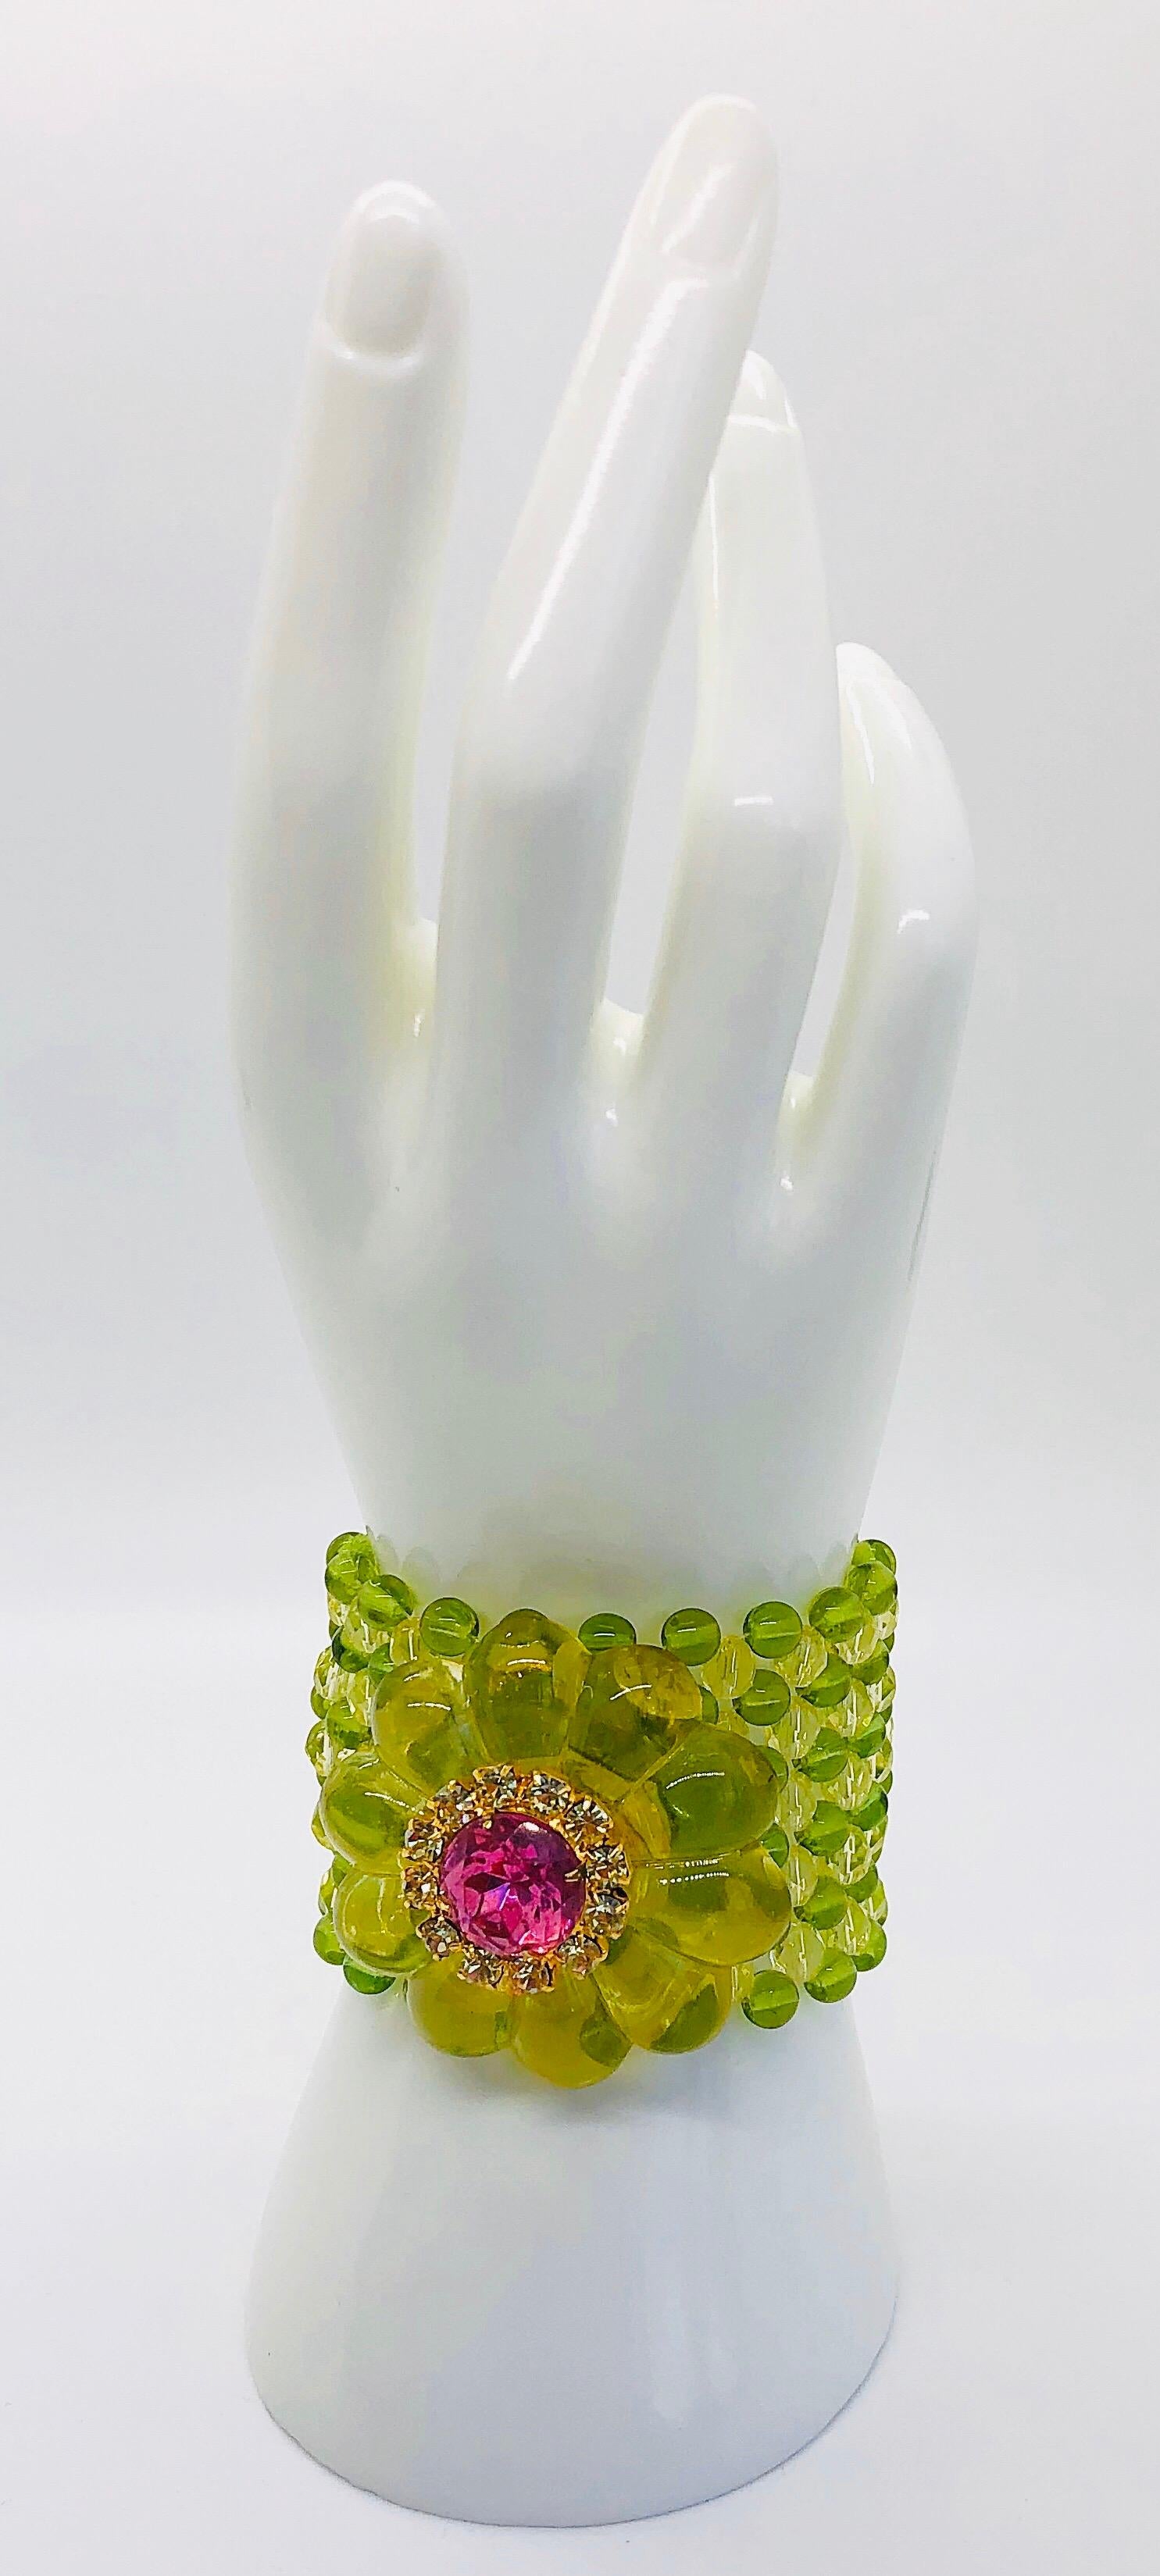 Chic 1960s Neon Lime Green + Hot Pink Lucite Vintage 60s Flower Bracelet Cuff 11